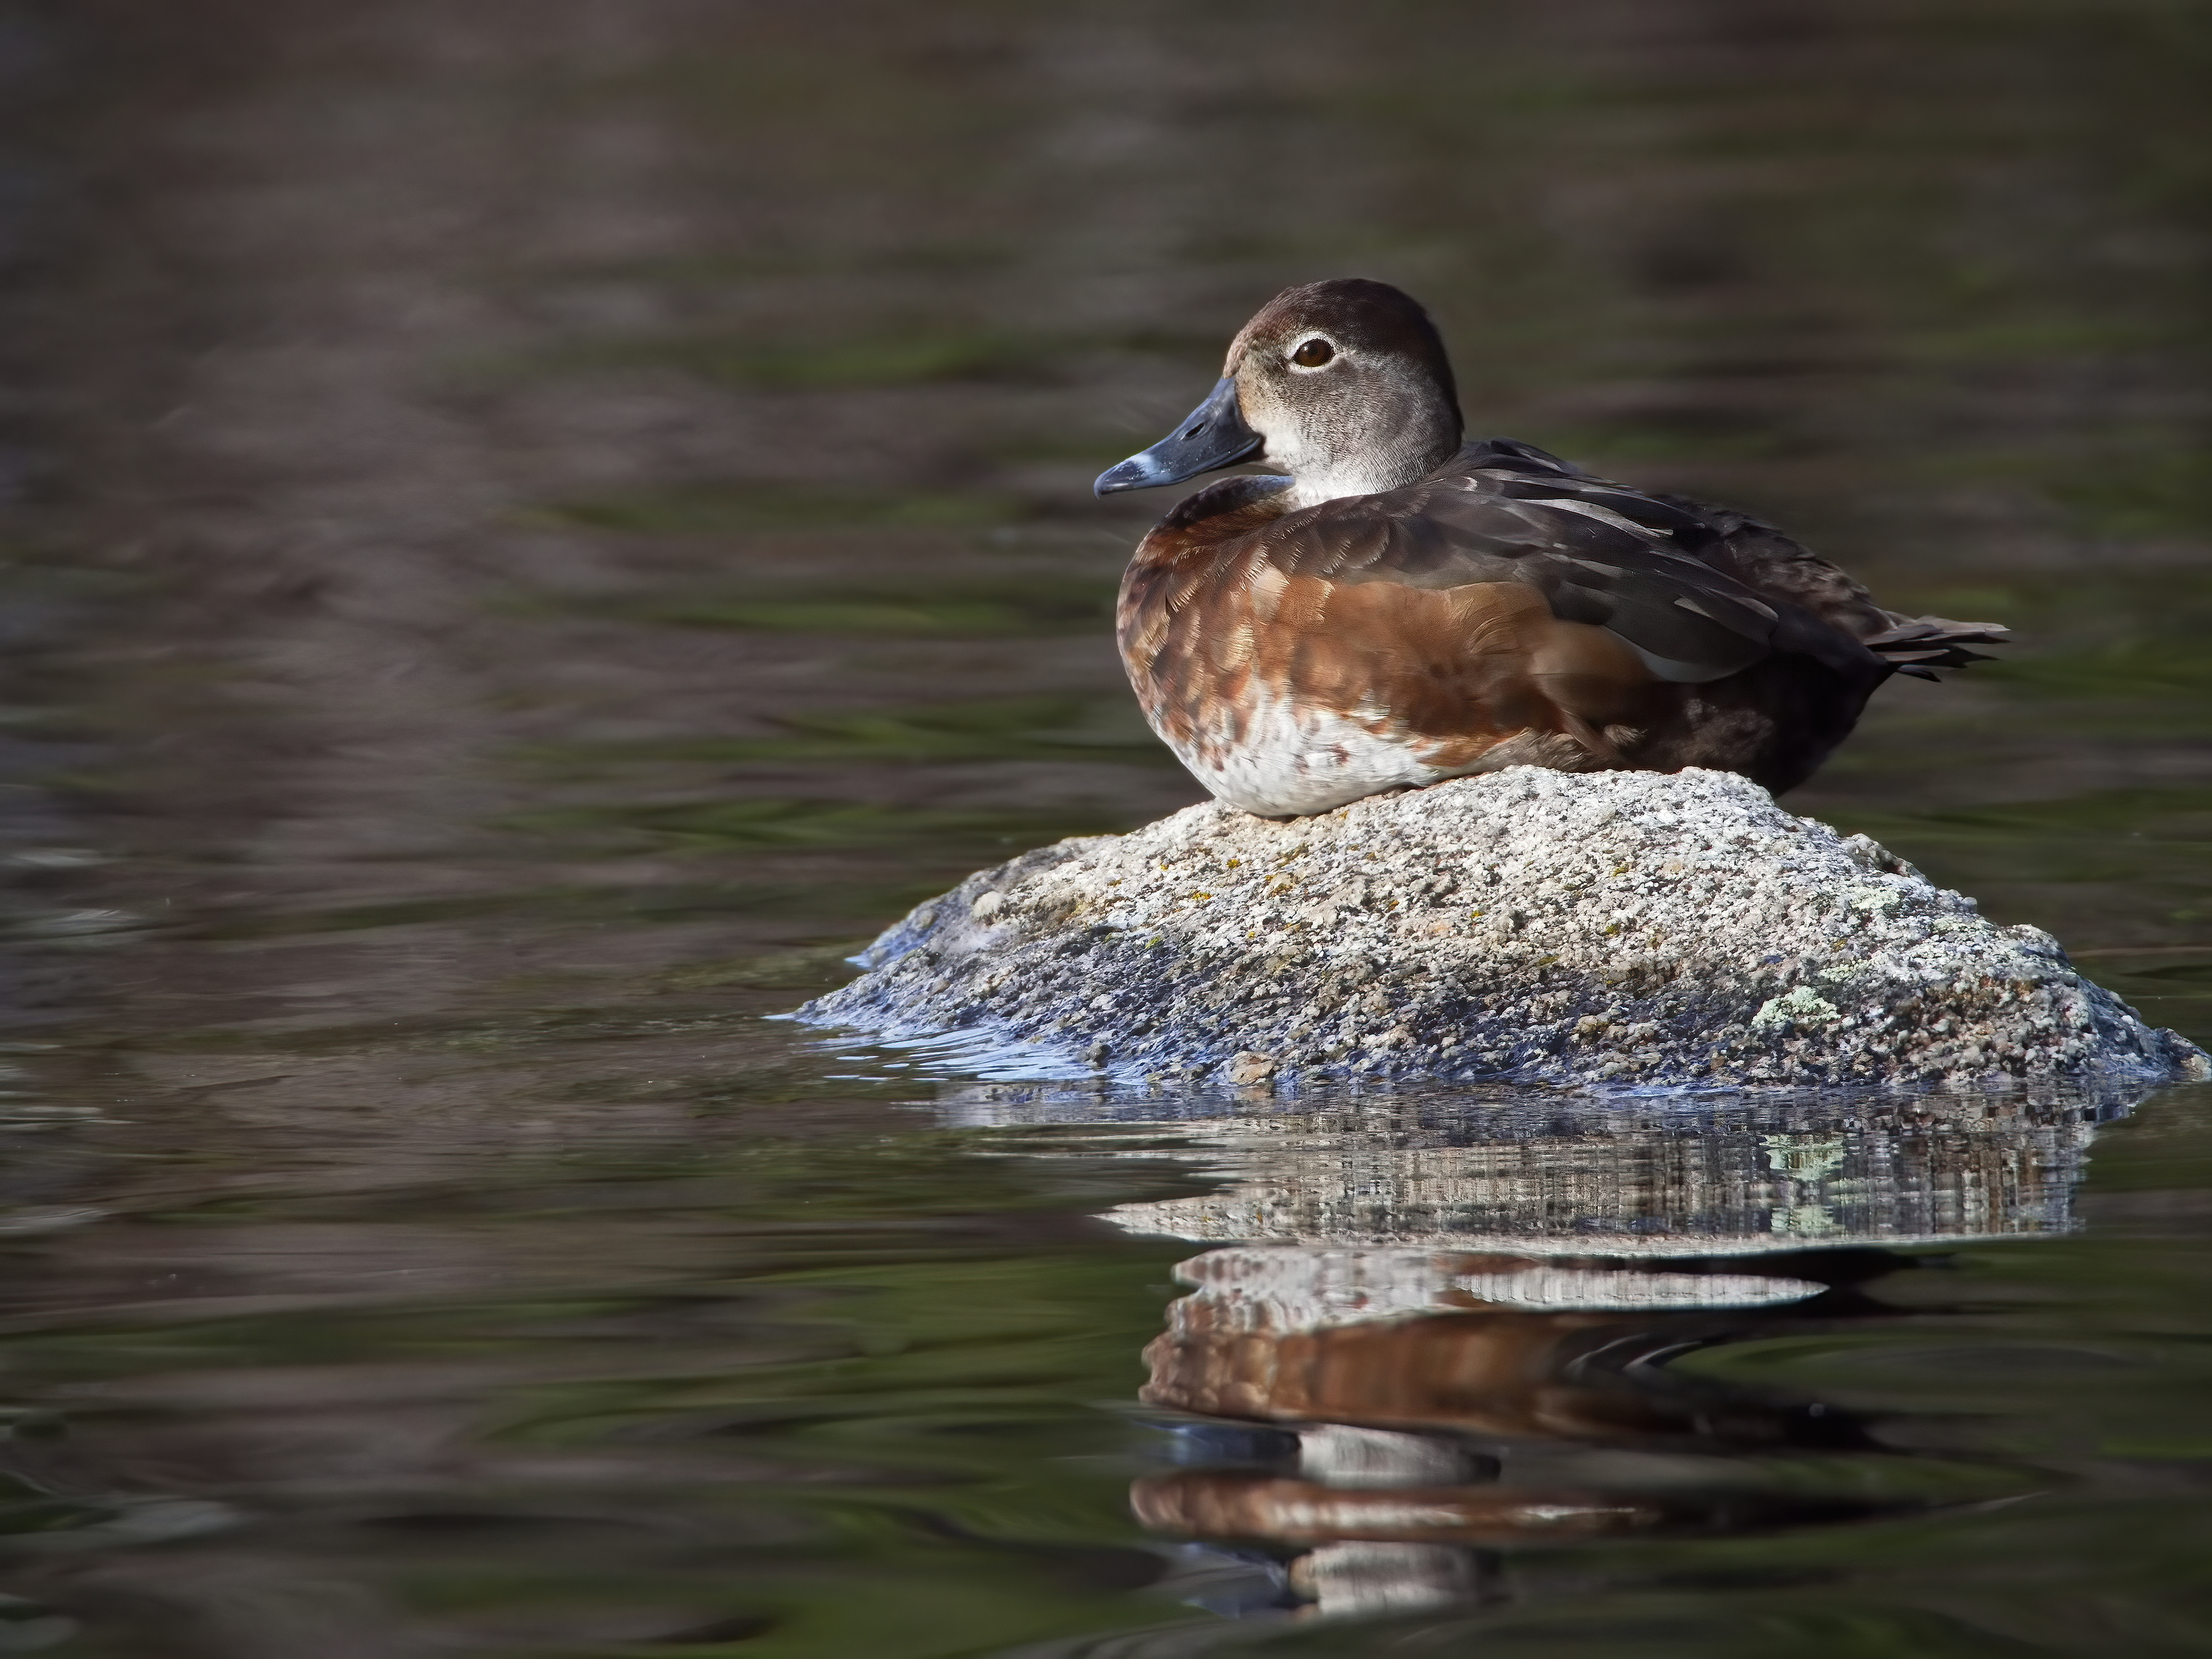 A duck sits on a rock surrounded by water.